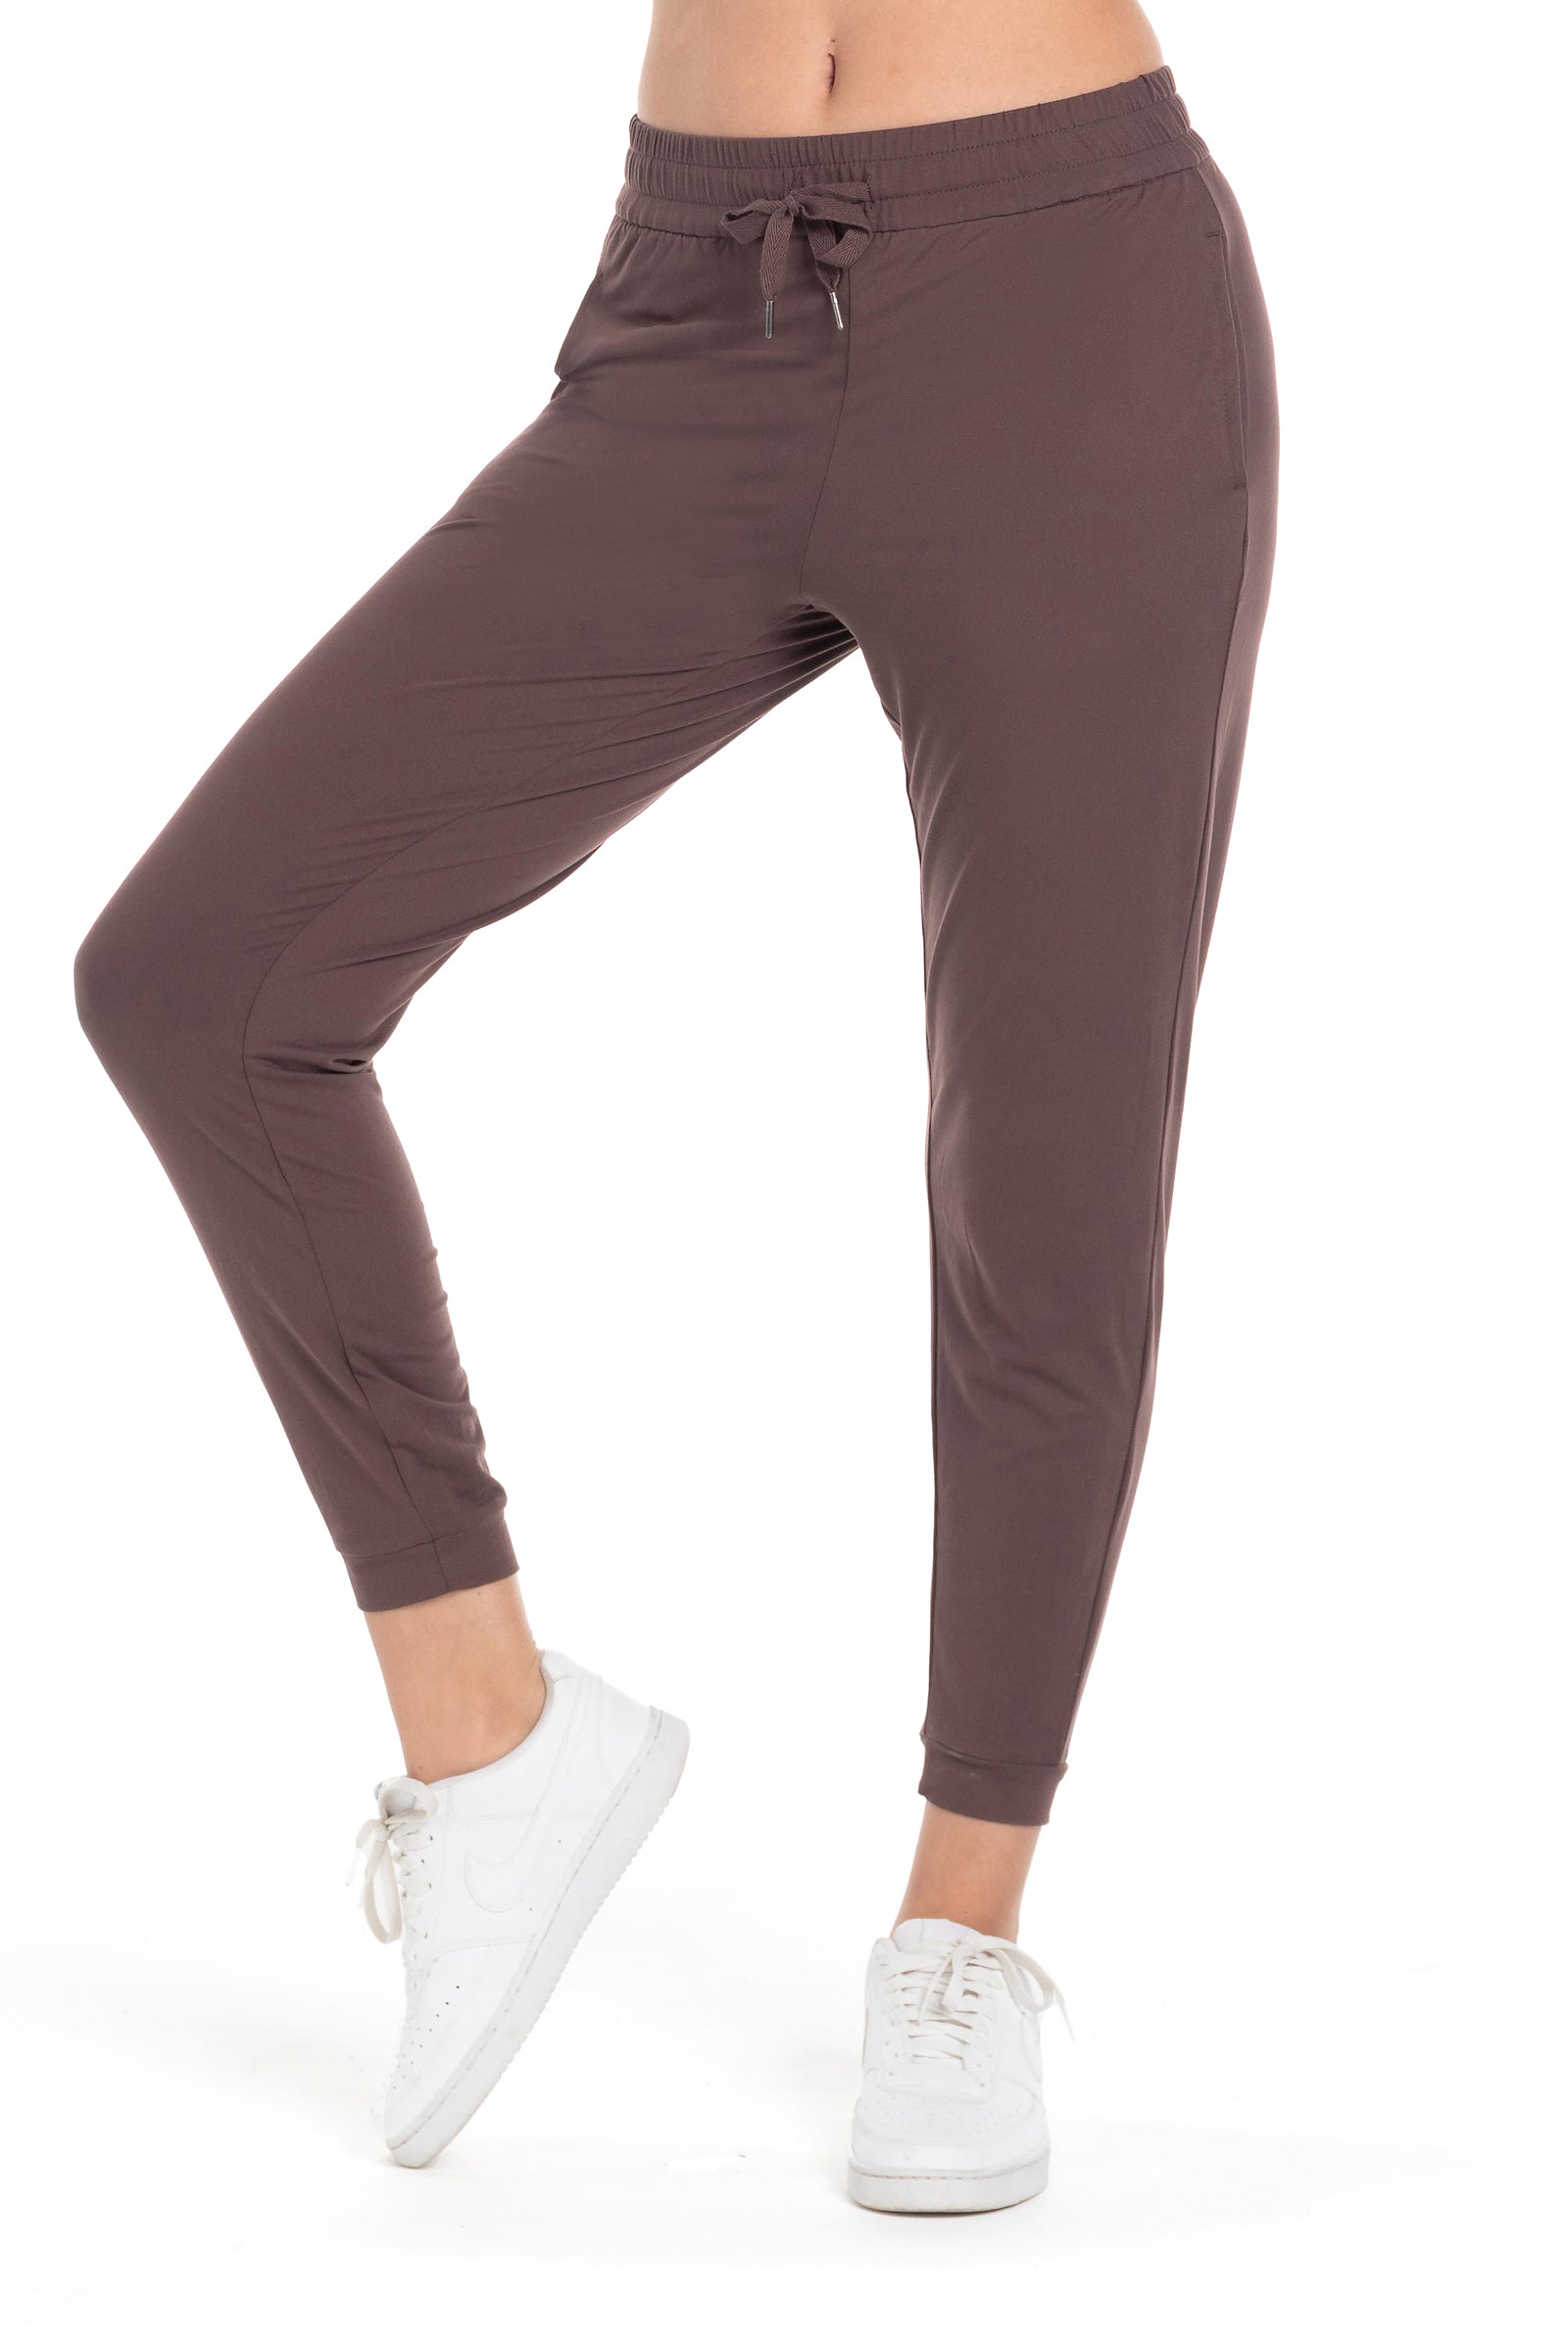 Breathable Quick Dry Sports Joggers Womens For Women Slim Fit Running  Leggings With Nine Point Pockets For Gym, Training, And Fitness From  Miki886, $21.61